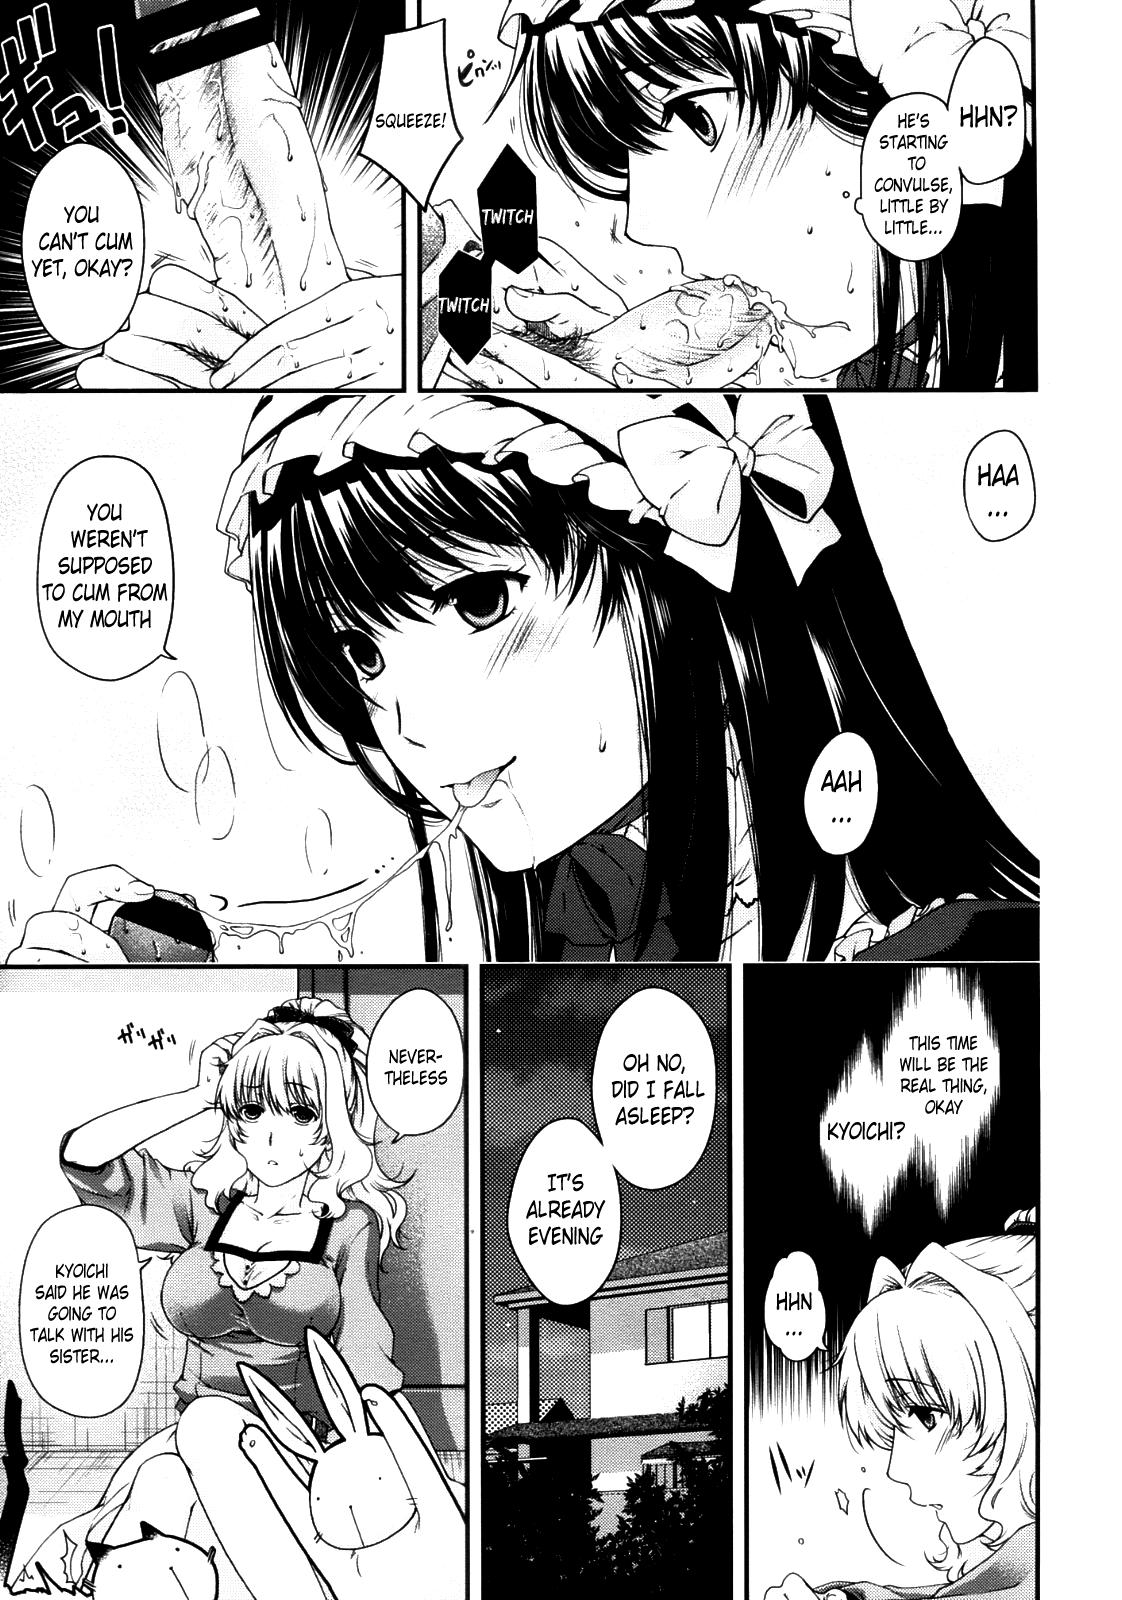 Brazilian Kare to Imouto no Houteishiki | The Equation of Him and His Little Sister Perfect Butt - Page 11